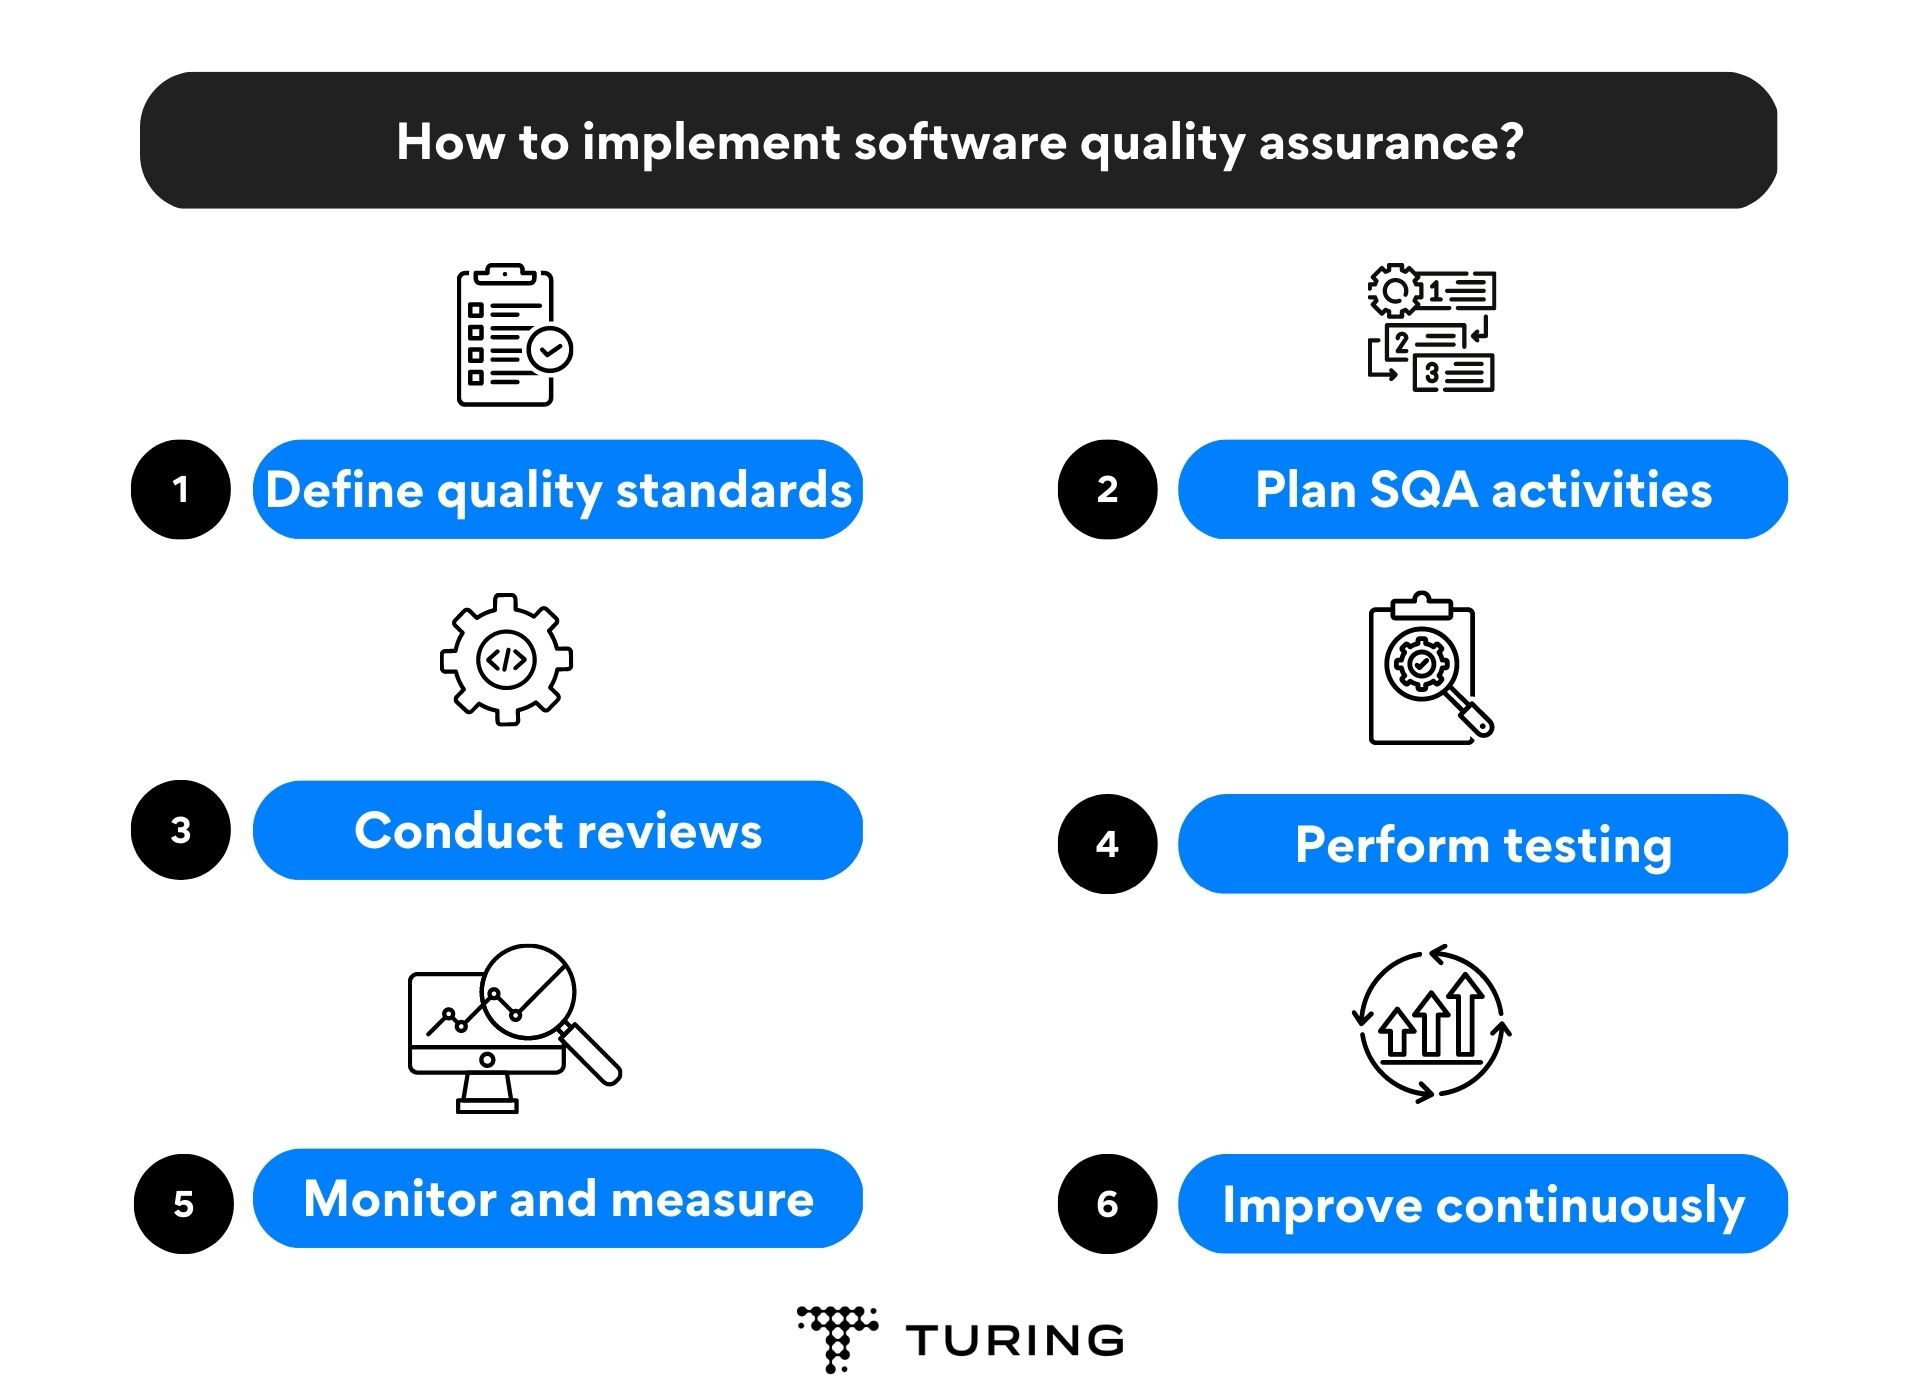 How to implement software quality assurance